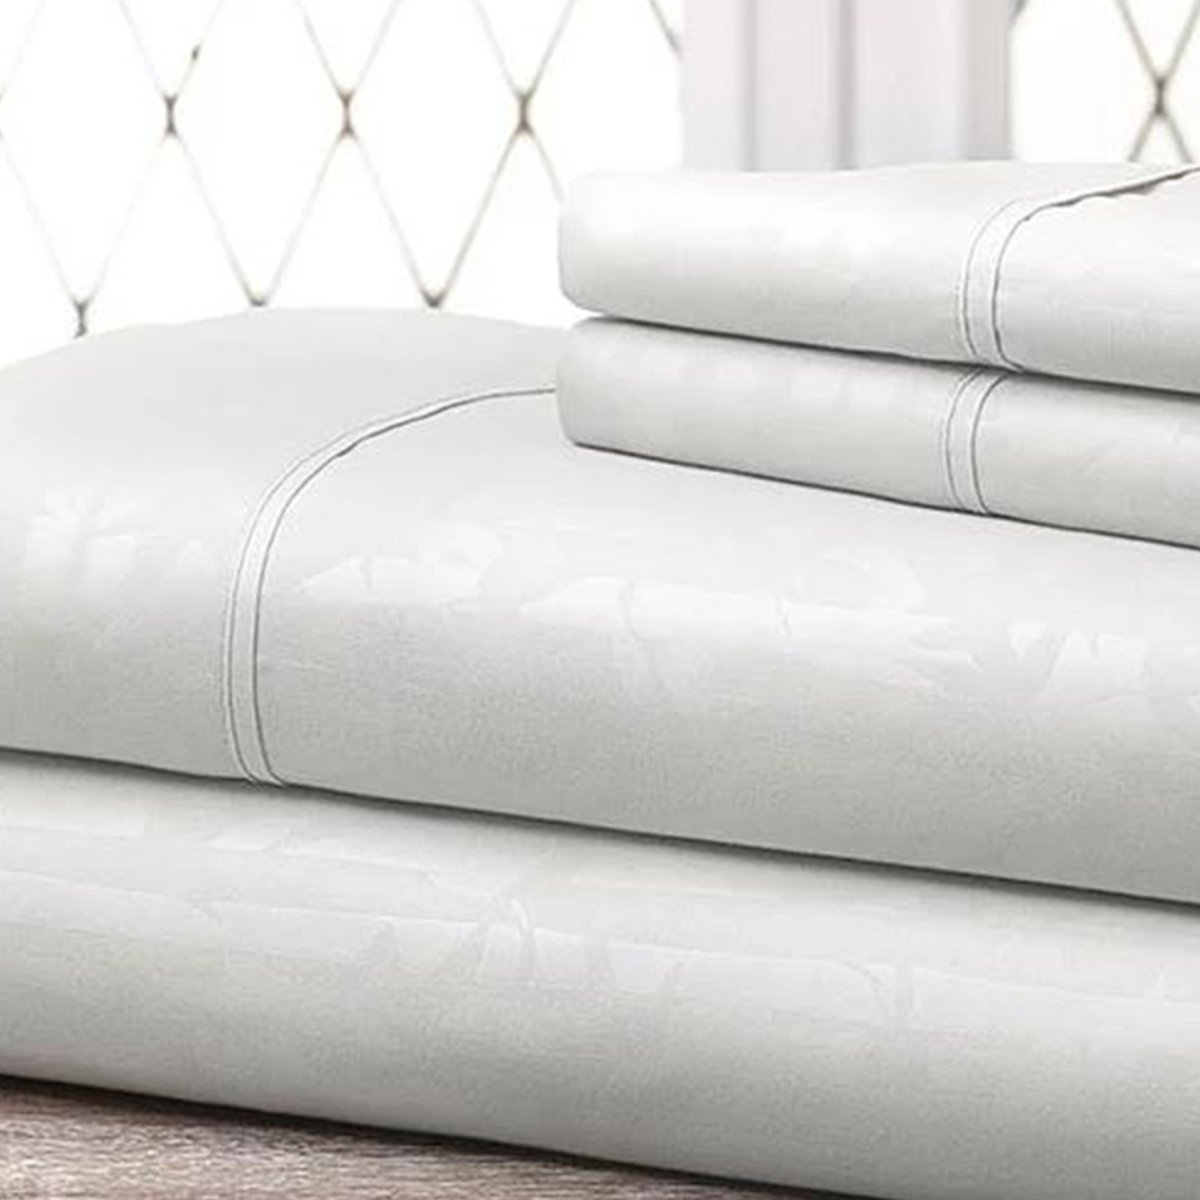 Hny-4pc-eb-whi-f Super-soft 1600 Series Bamboo Embossed Bed Sheet, White - Full, 4 Piece